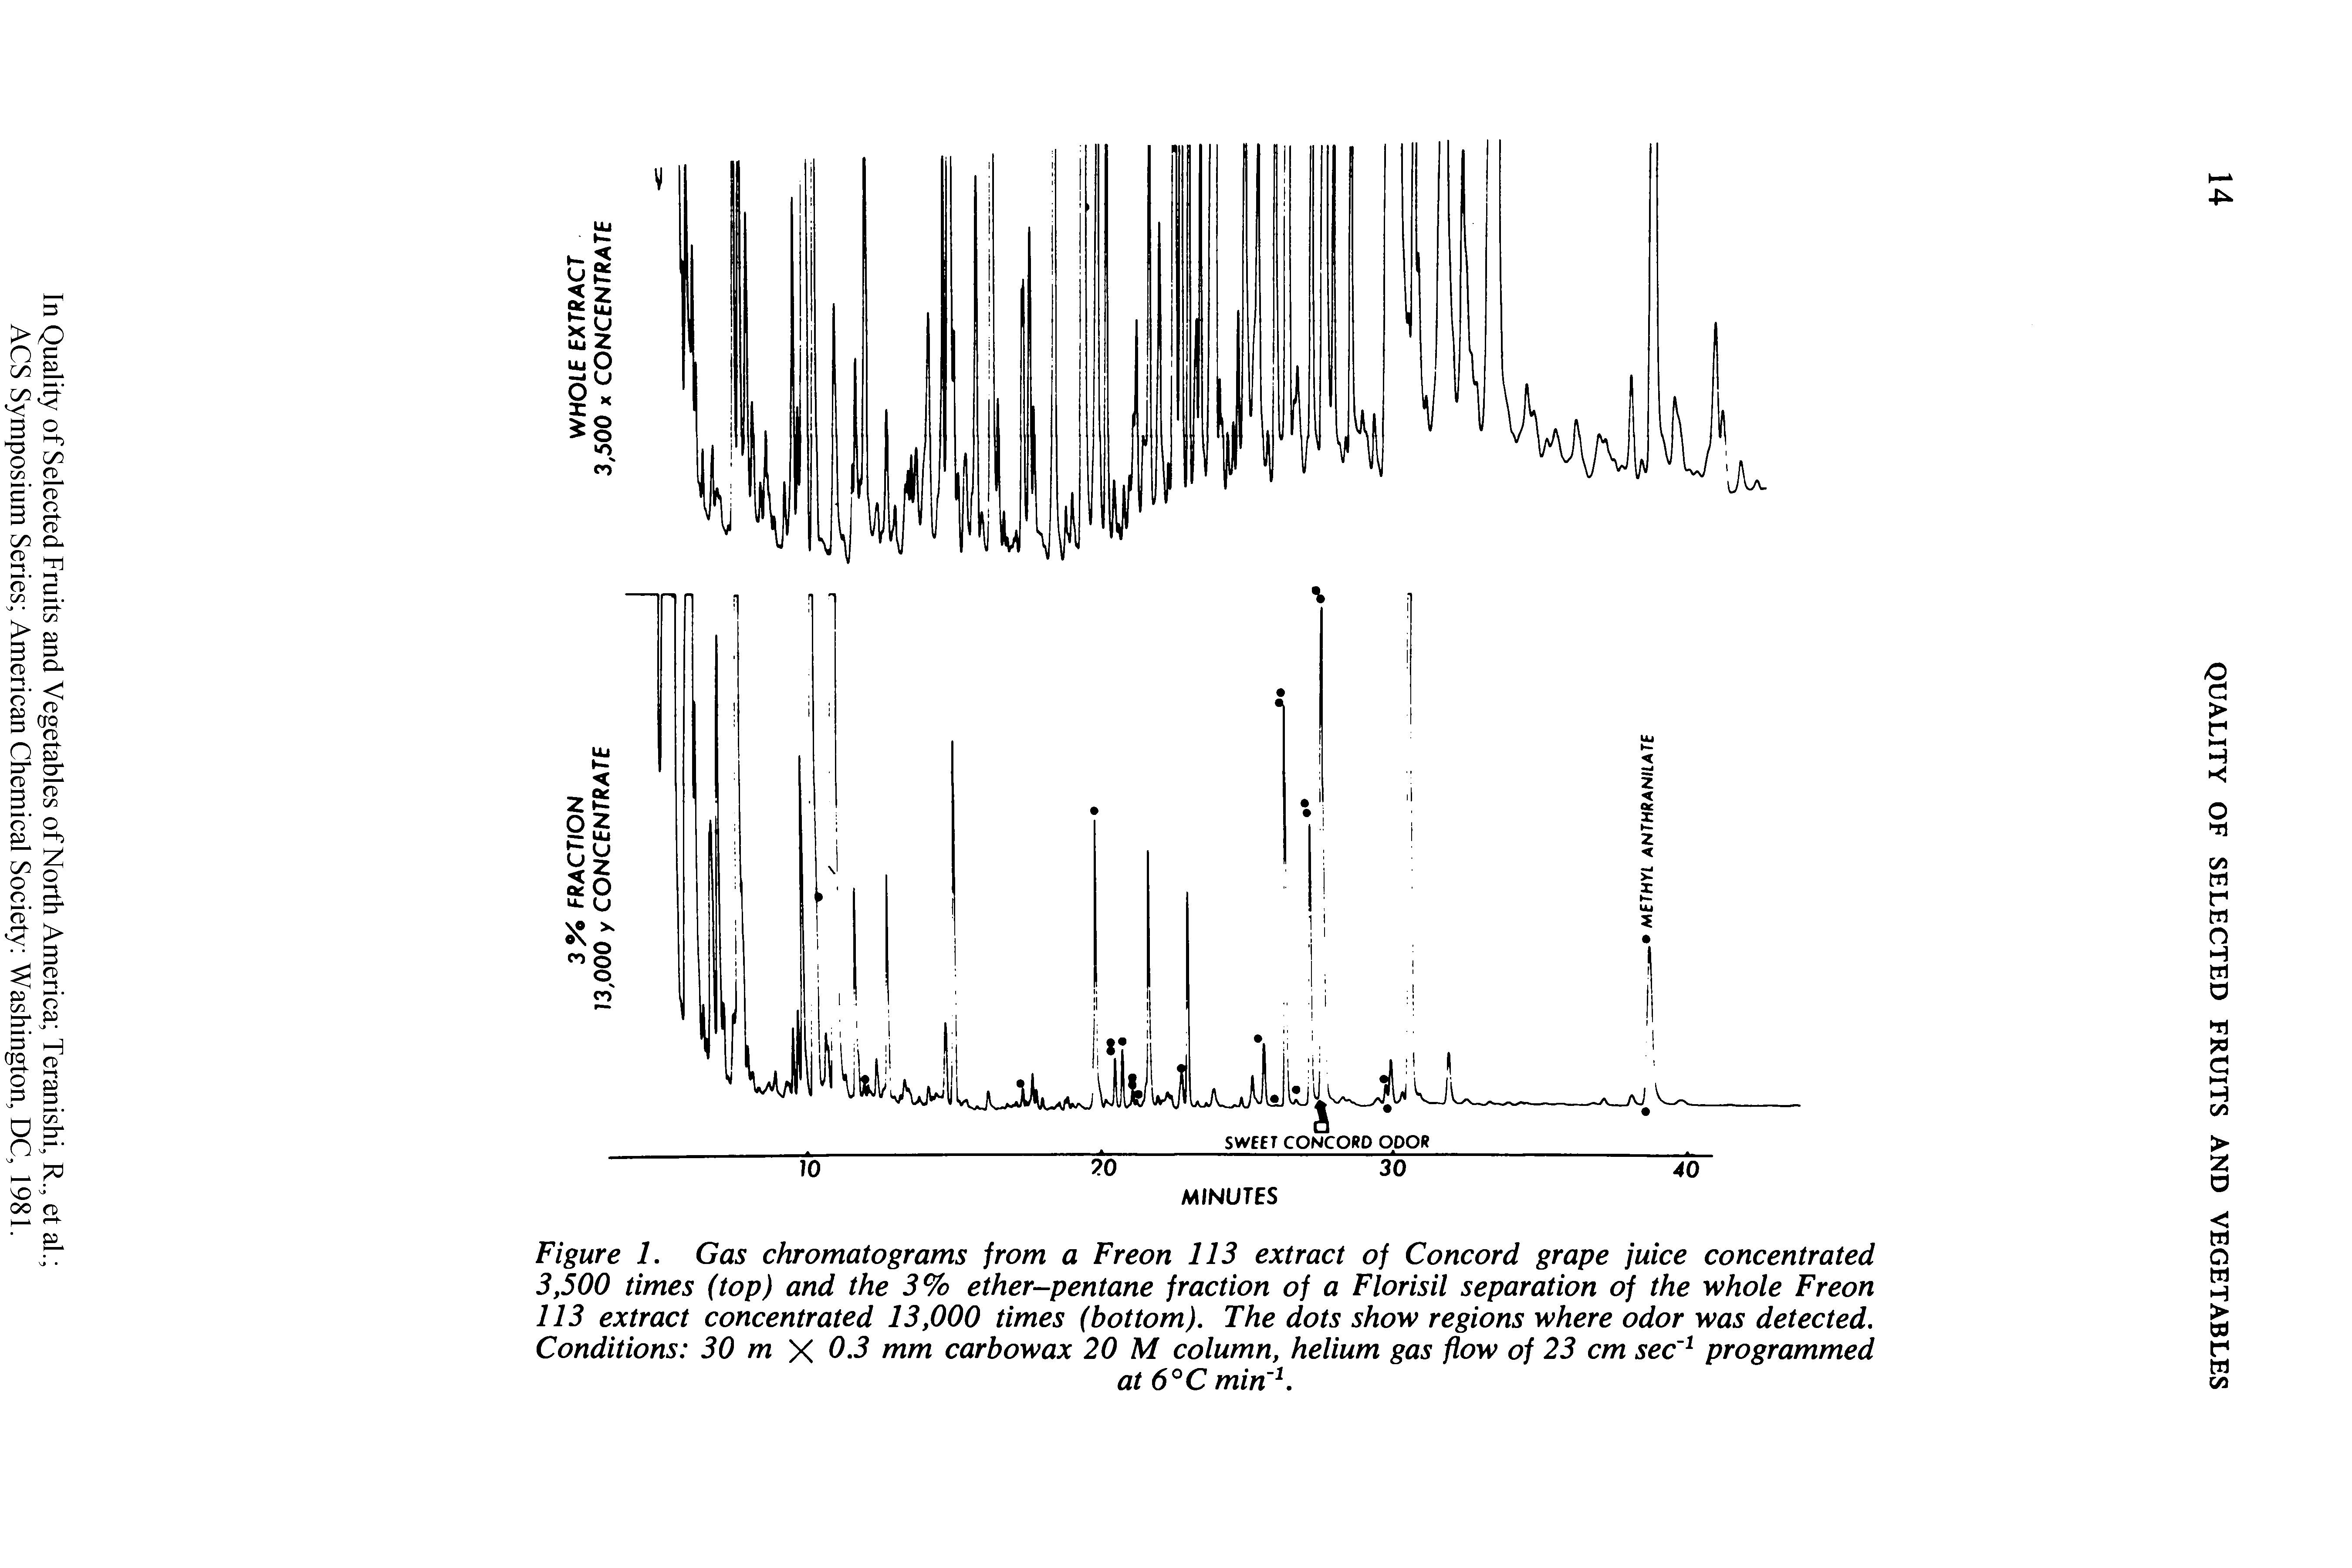 Figure 1. Gas chromatograms from a Freon 113 extract of Concord grape juice concentrated 3,500 times (top) and the 3% ether-pentane fraction of a Florisil separation of the whole Freon 113 extract concentrated 13,000 times (bottom). The dots show regions where odor was detected. Conditions 30 m 0.3 mm carbowax 20 M column, helium gas flow of 23 cm sec programmed...